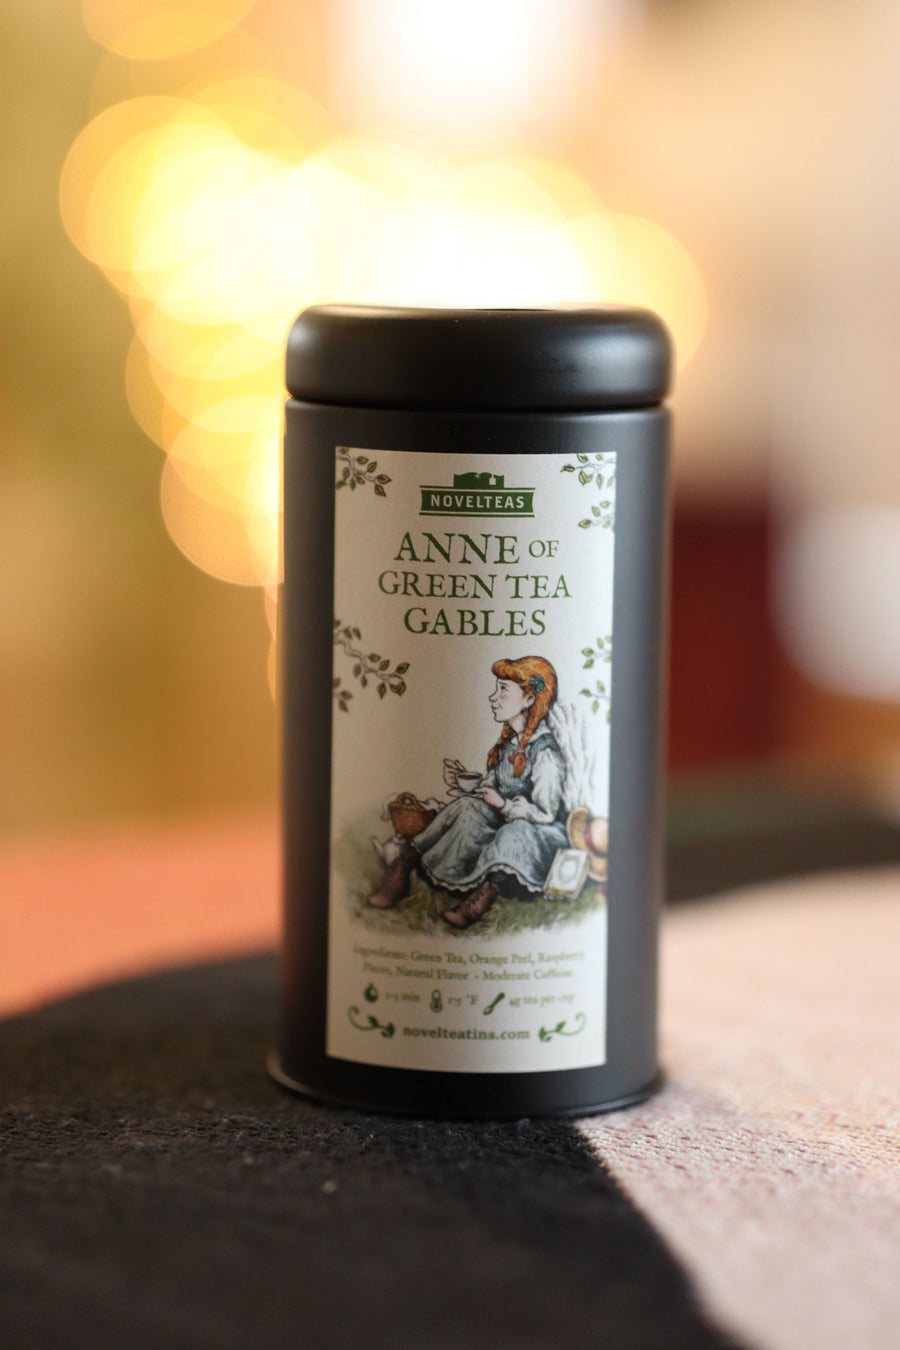 Anne of Green Tea Gables - Punny Loose Tea Tin for Book Lovers